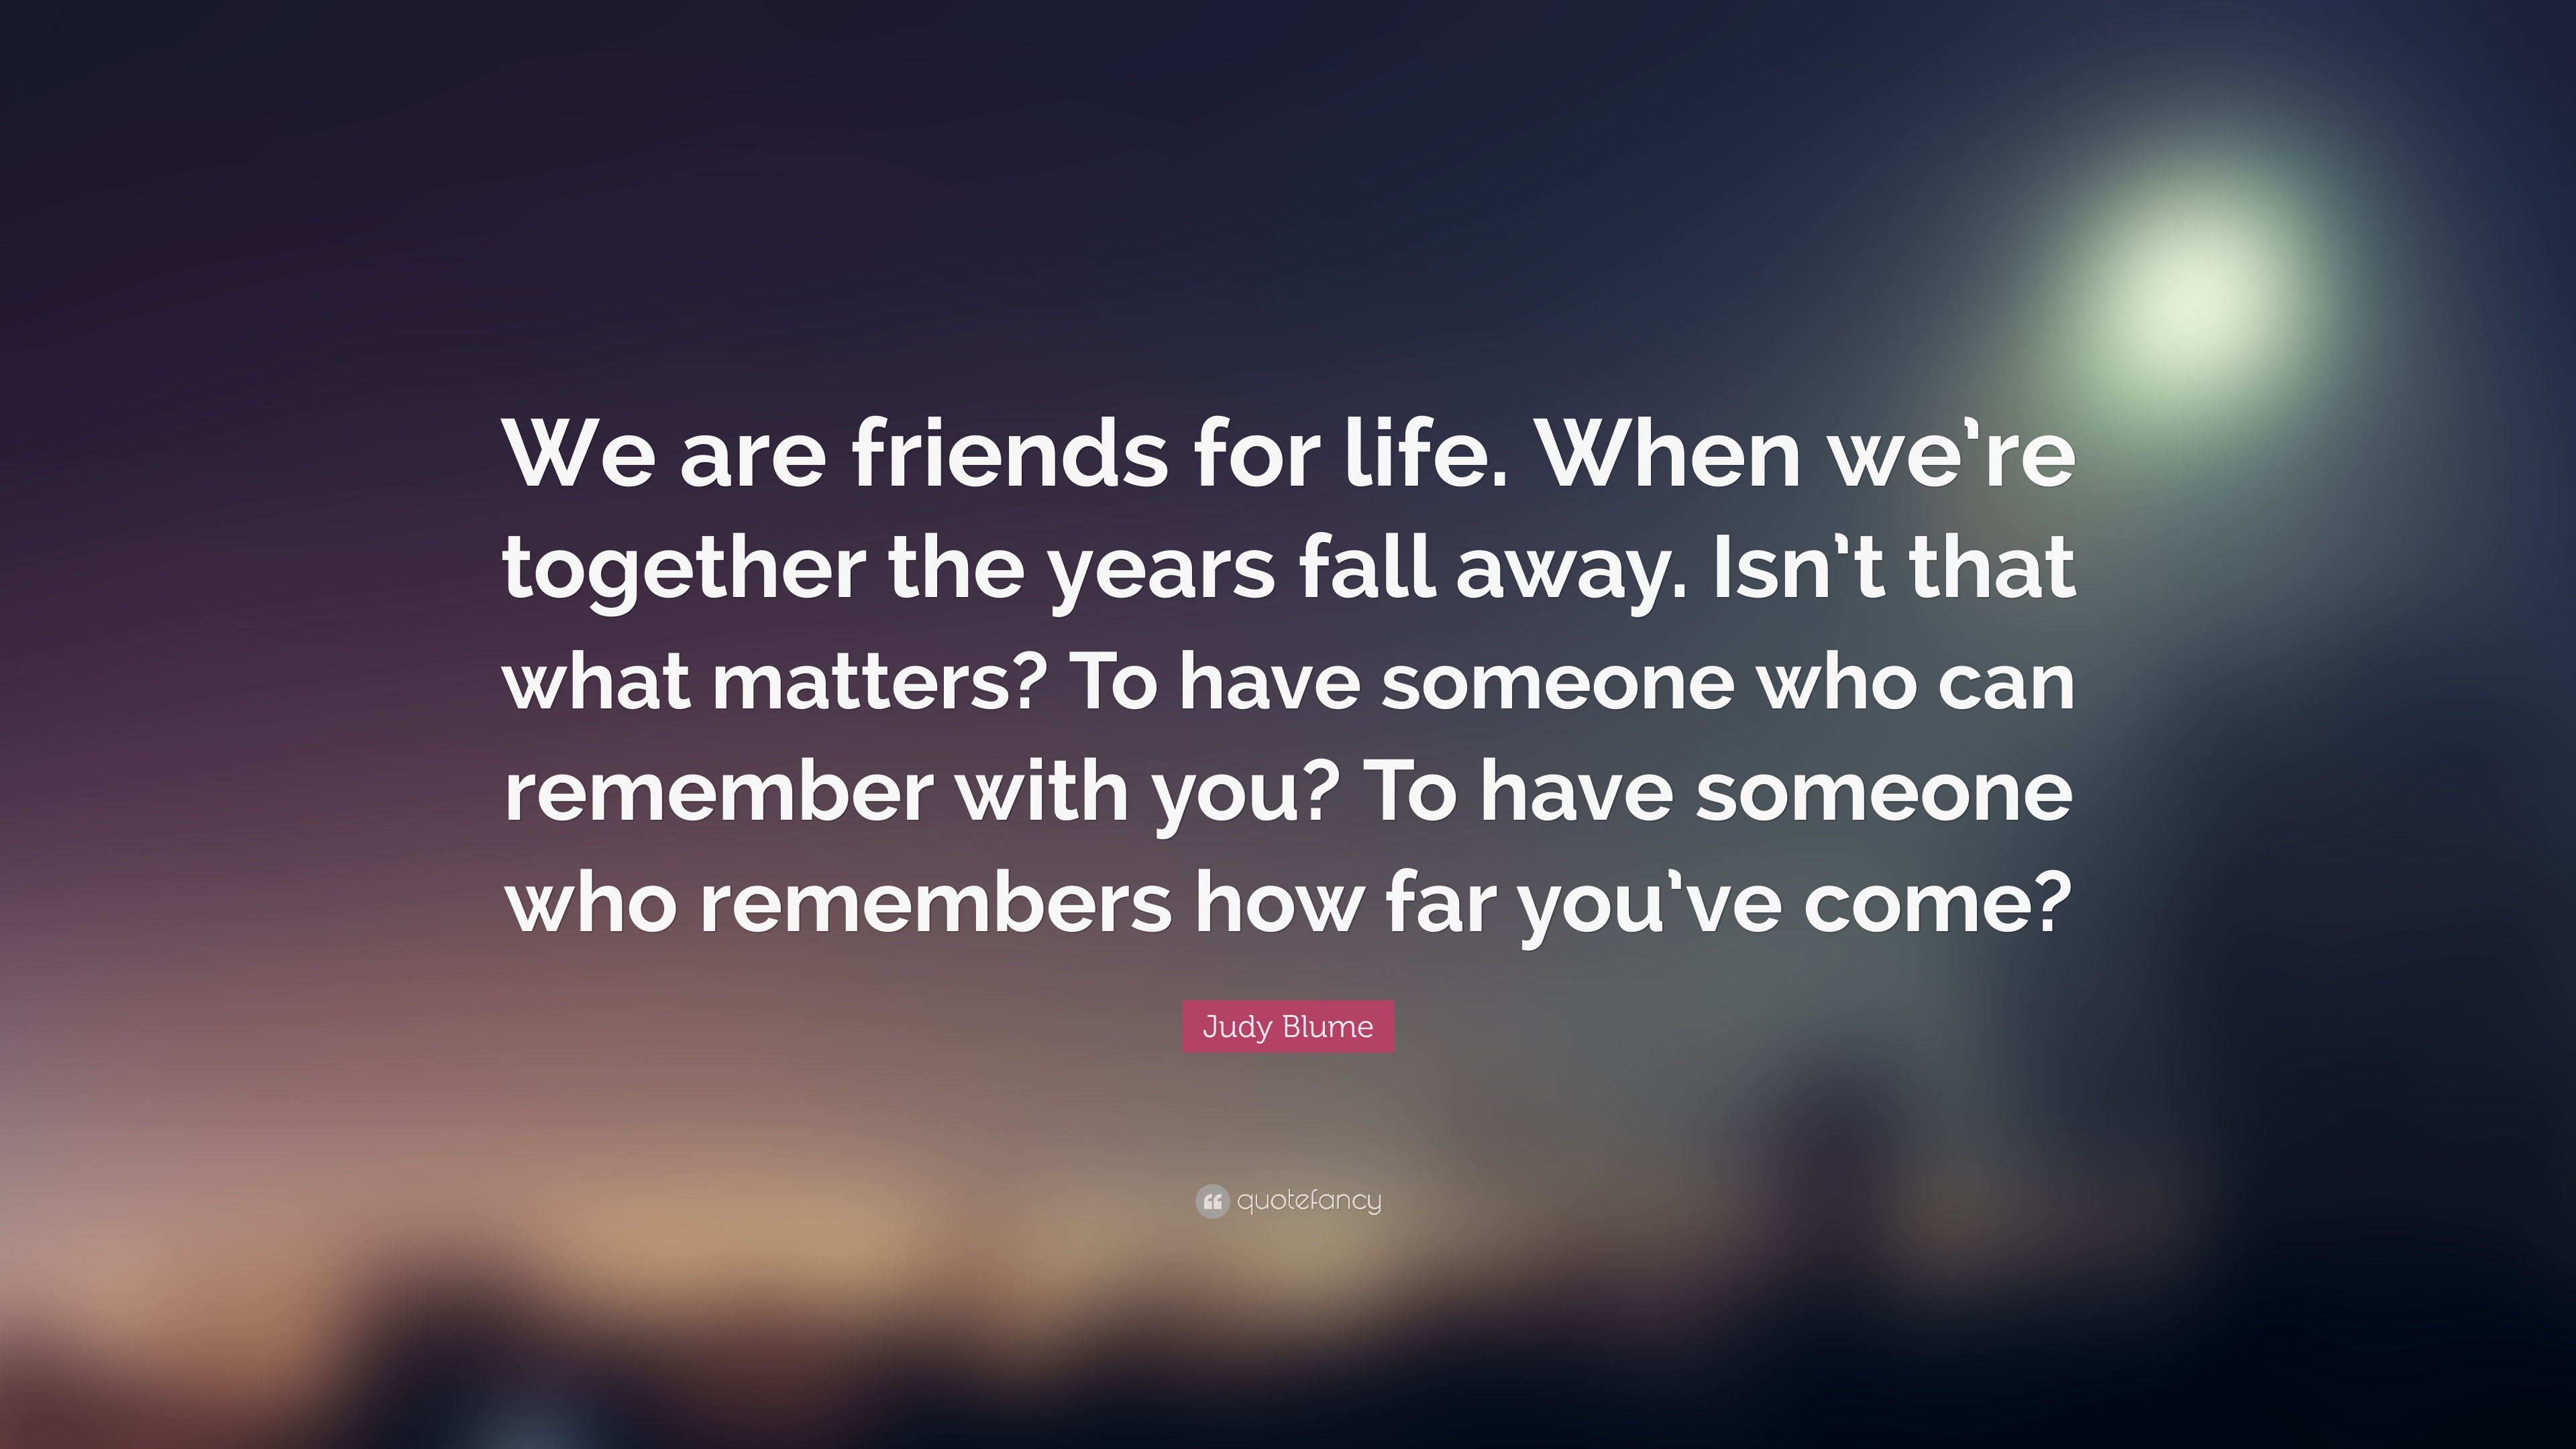 Judy Blume Quote “We are friends for life When we re to her